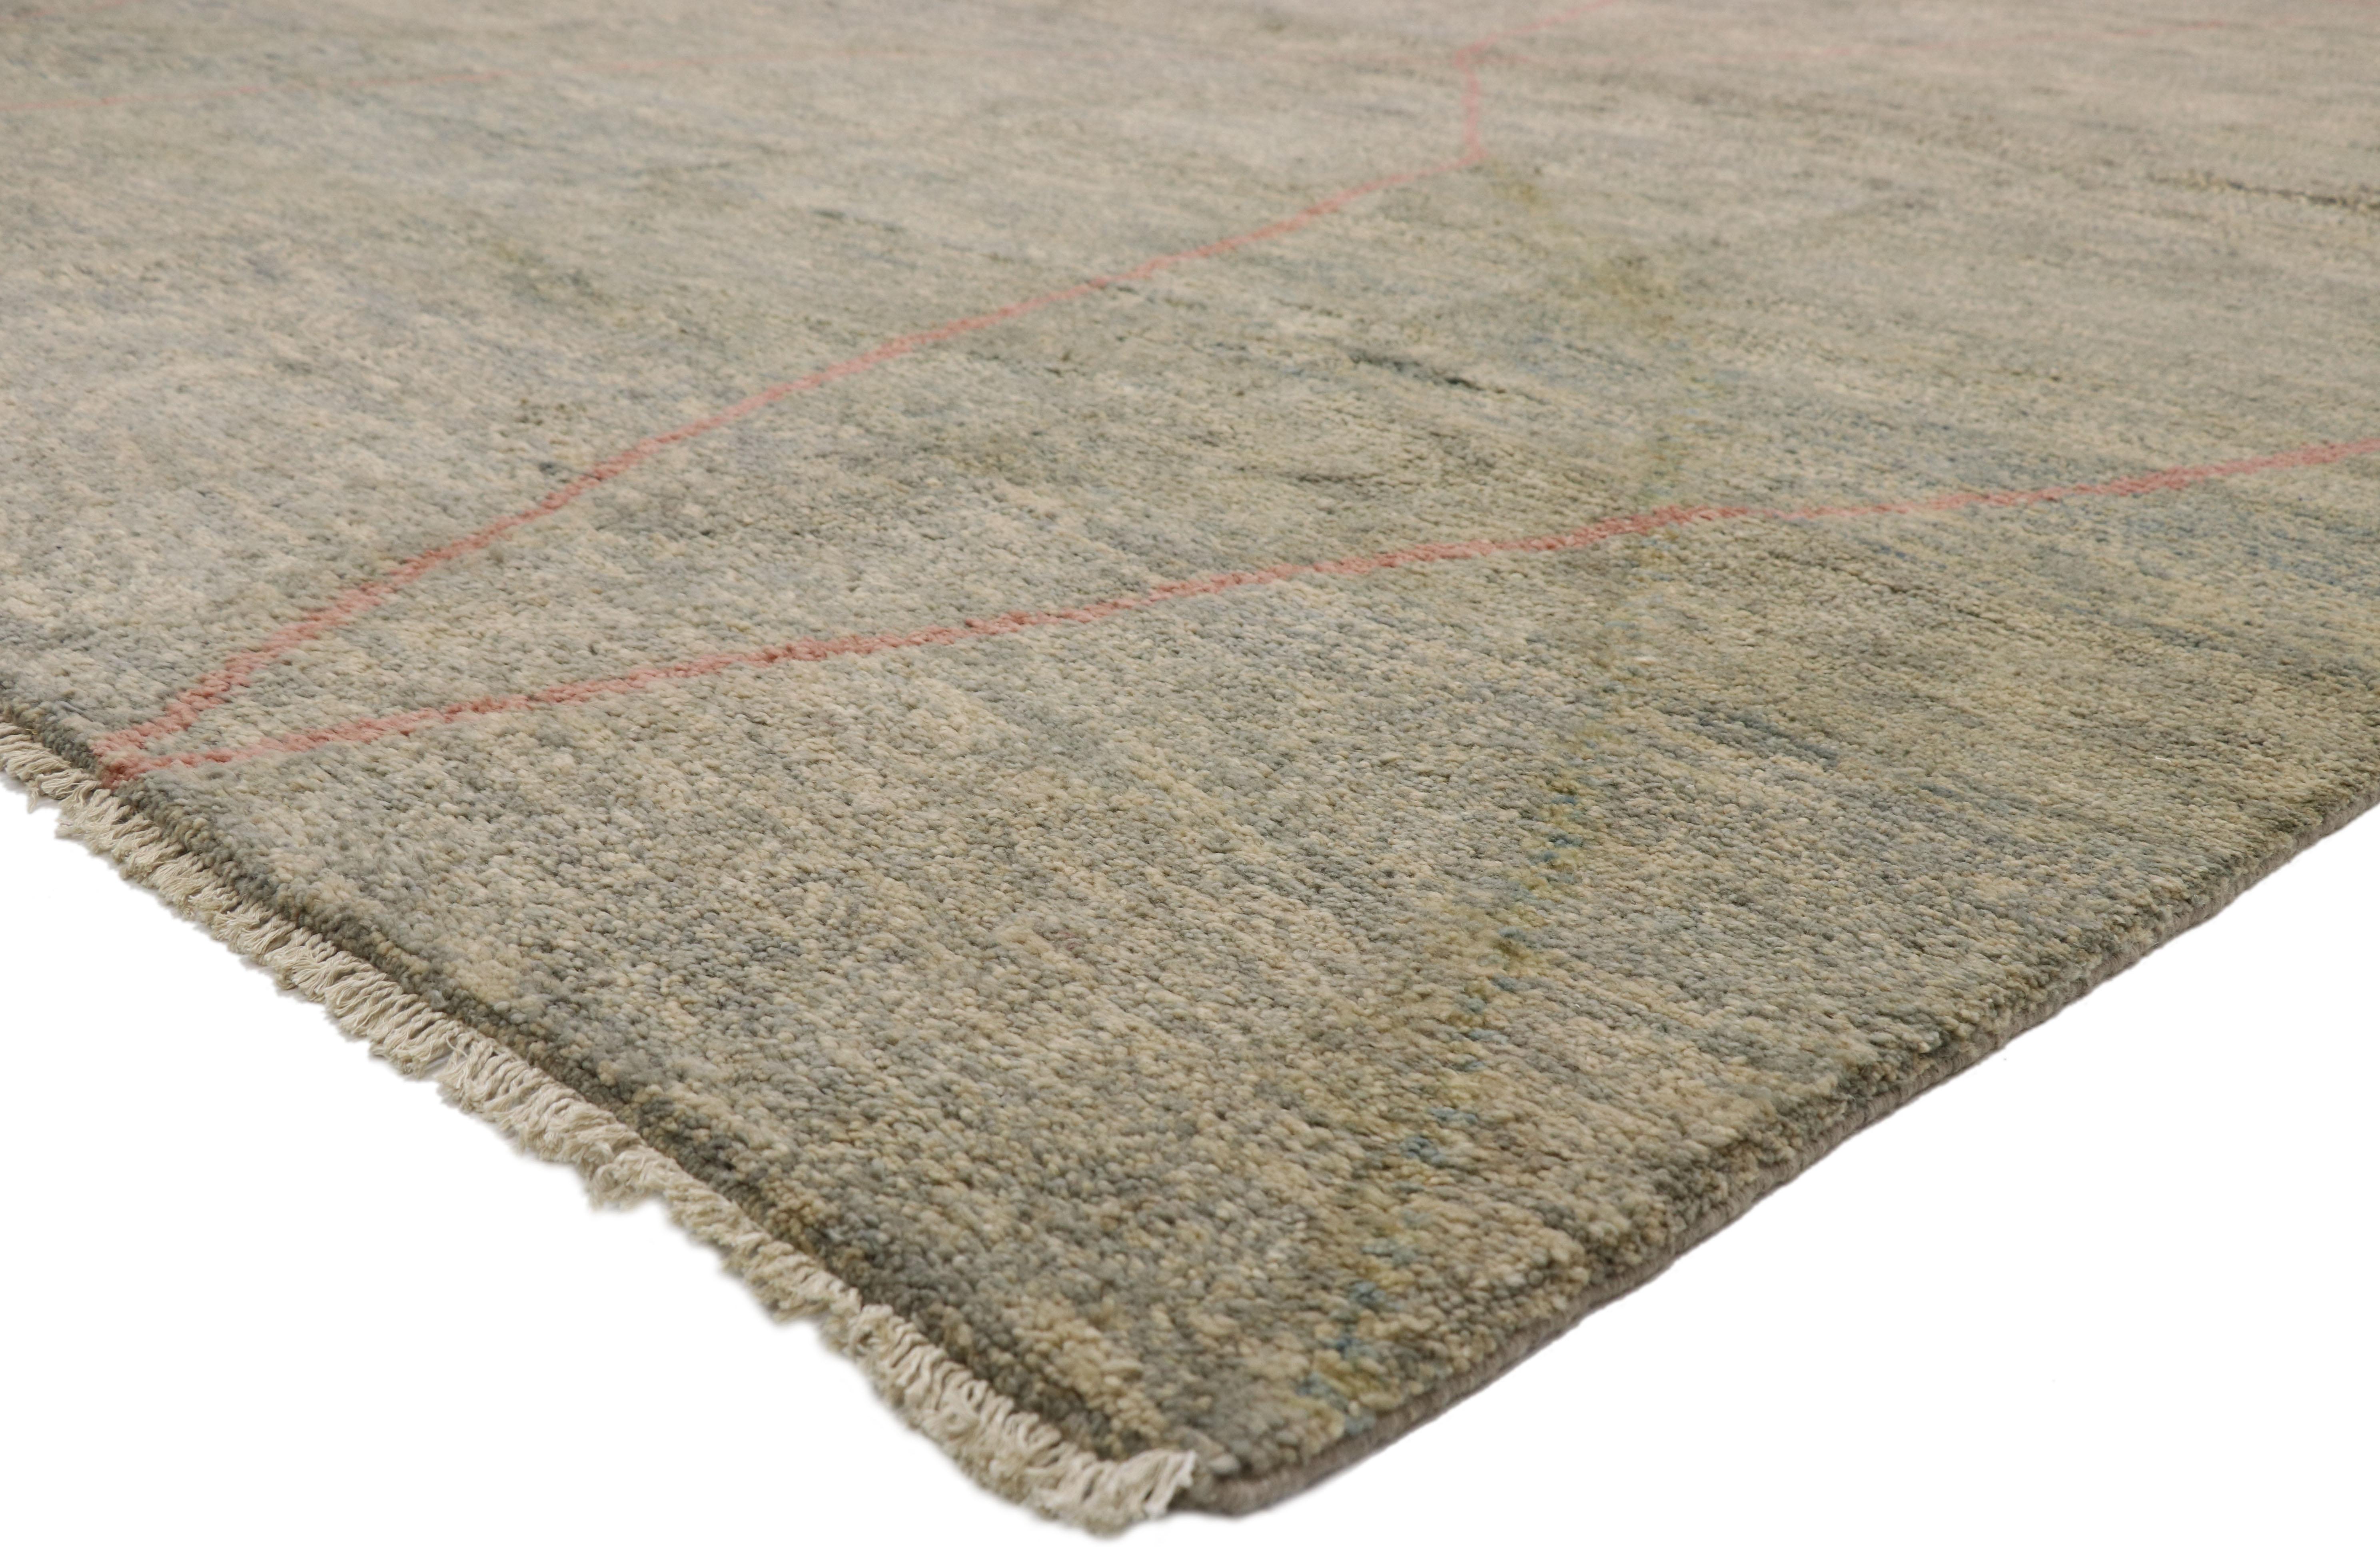 80536 Modern Earthy Moroccan Rug, 10'00 x 13'05.
This hand knotted wool contemporary Moroccan area rug features contrasting rose pink lines running the length of the bluish-grayish backdrop. The thin lines criss-cross in an organic manner, creating